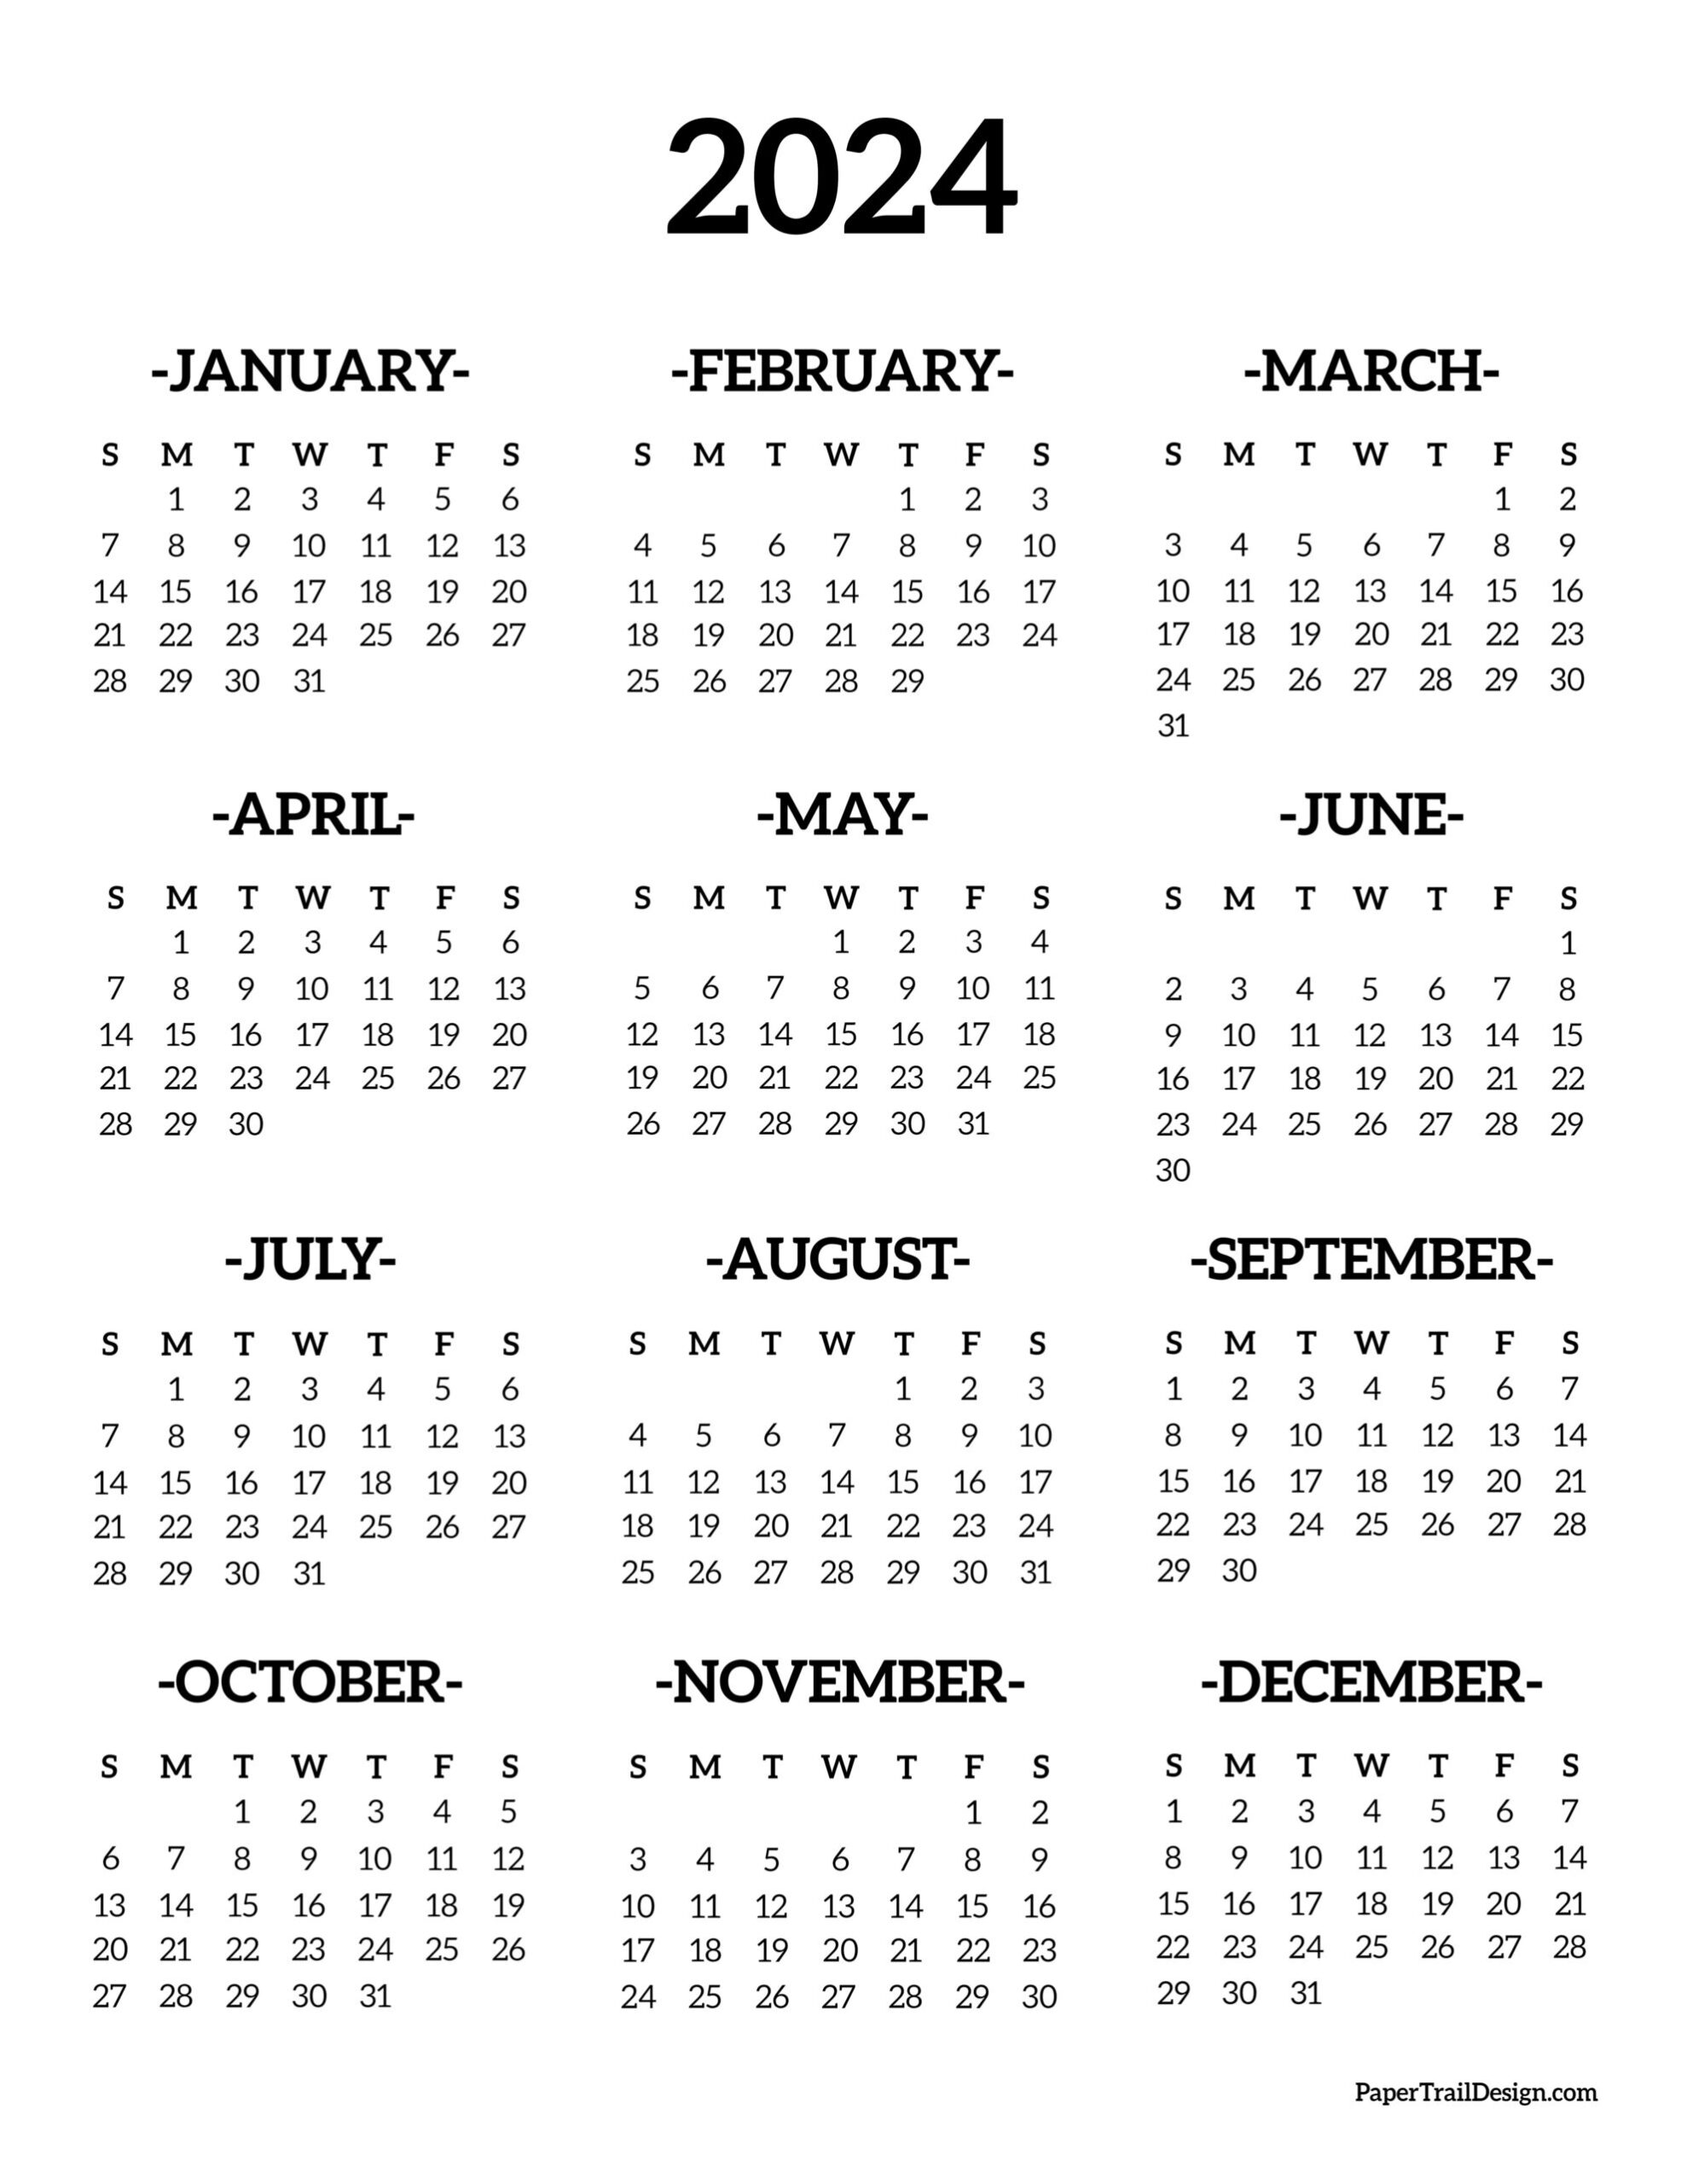 Calendar 2024 Printable One Page - Paper Trail Design | Yearly Calendar 2024 Printable Free